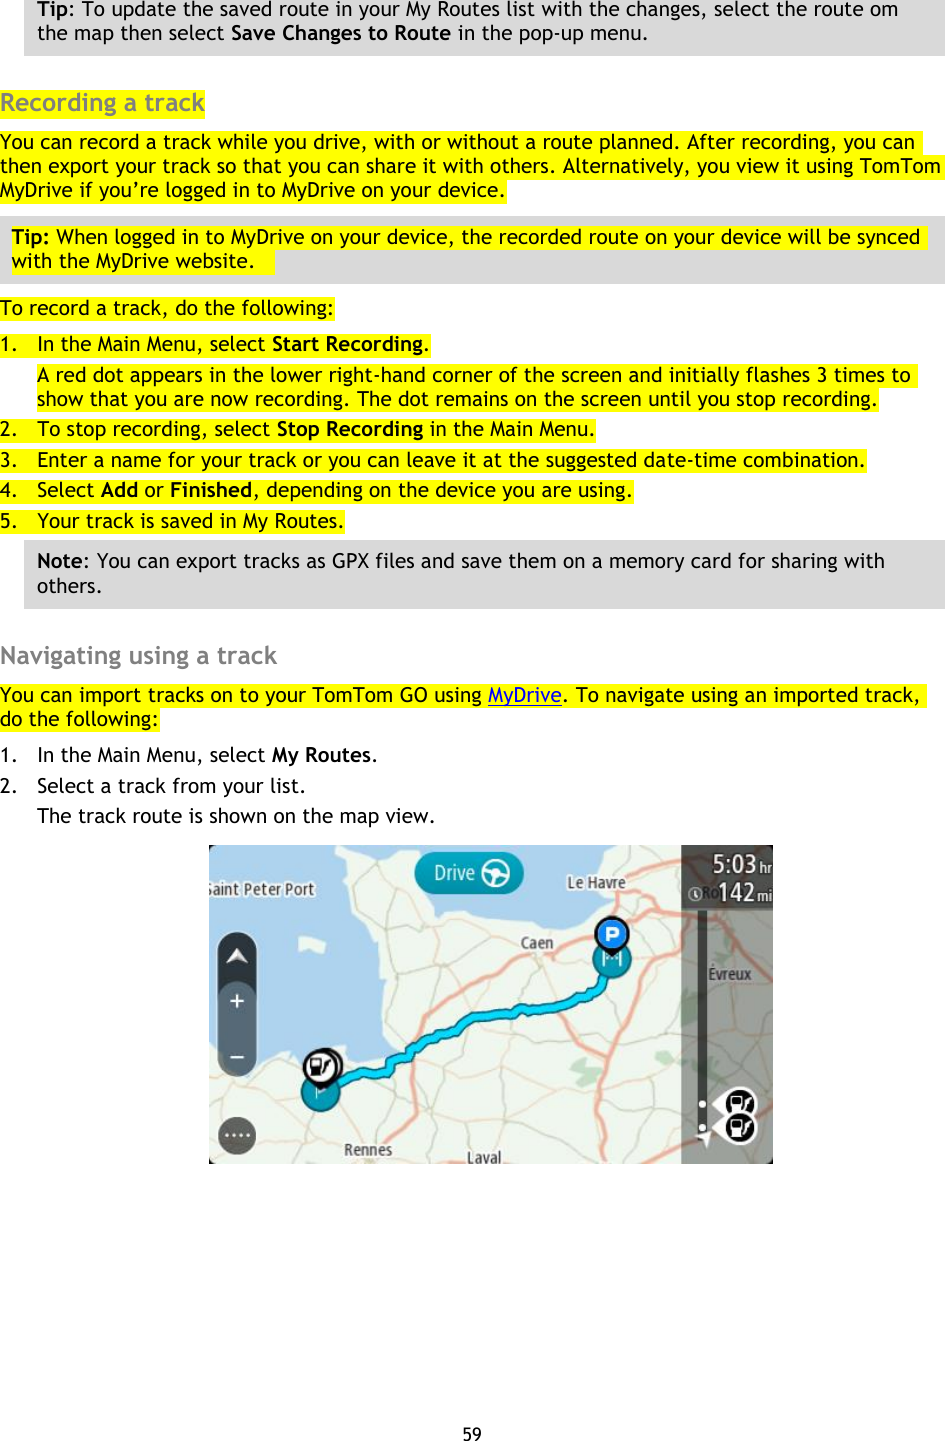 59    Tip: To update the saved route in your My Routes list with the changes, select the route om the map then select Save Changes to Route in the pop-up menu.  Recording a track You can record a track while you drive, with or without a route planned. After recording, you can then export your track so that you can share it with others. Alternatively, you view it using TomTom MyDrive if you’re logged in to MyDrive on your device. Tip: When logged in to MyDrive on your device, the recorded route on your device will be synced with the MyDrive website.     To record a track, do the following: 1. In the Main Menu, select Start Recording. A red dot appears in the lower right-hand corner of the screen and initially flashes 3 times to show that you are now recording. The dot remains on the screen until you stop recording. 2. To stop recording, select Stop Recording in the Main Menu. 3. Enter a name for your track or you can leave it at the suggested date-time combination. 4. Select Add or Finished, depending on the device you are using. 5. Your track is saved in My Routes. Note: You can export tracks as GPX files and save them on a memory card for sharing with others.  Navigating using a track You can import tracks on to your TomTom GO using MyDrive. To navigate using an imported track, do the following: 1. In the Main Menu, select My Routes. 2. Select a track from your list. The track route is shown on the map view.  